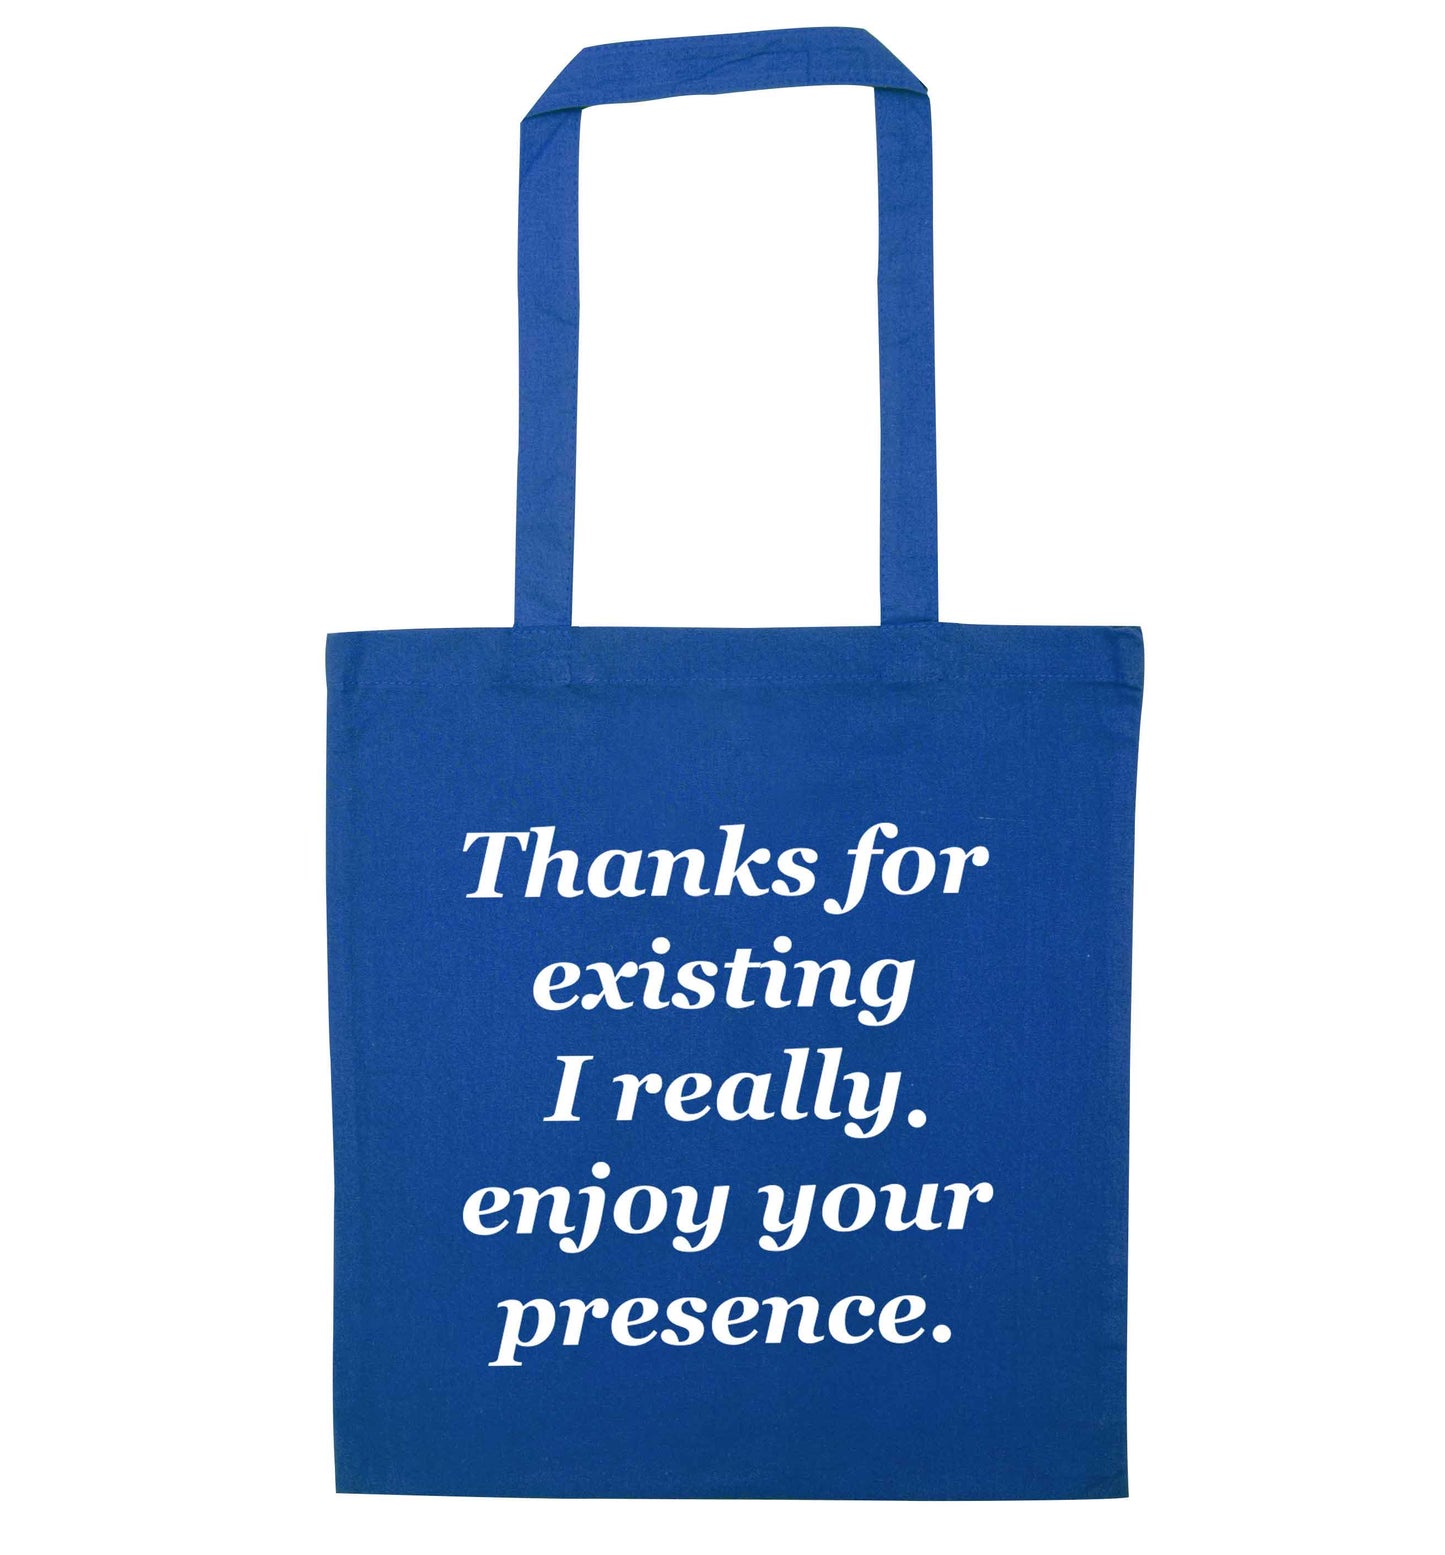 Thanks for existing I really enjoy your presence blue tote bag